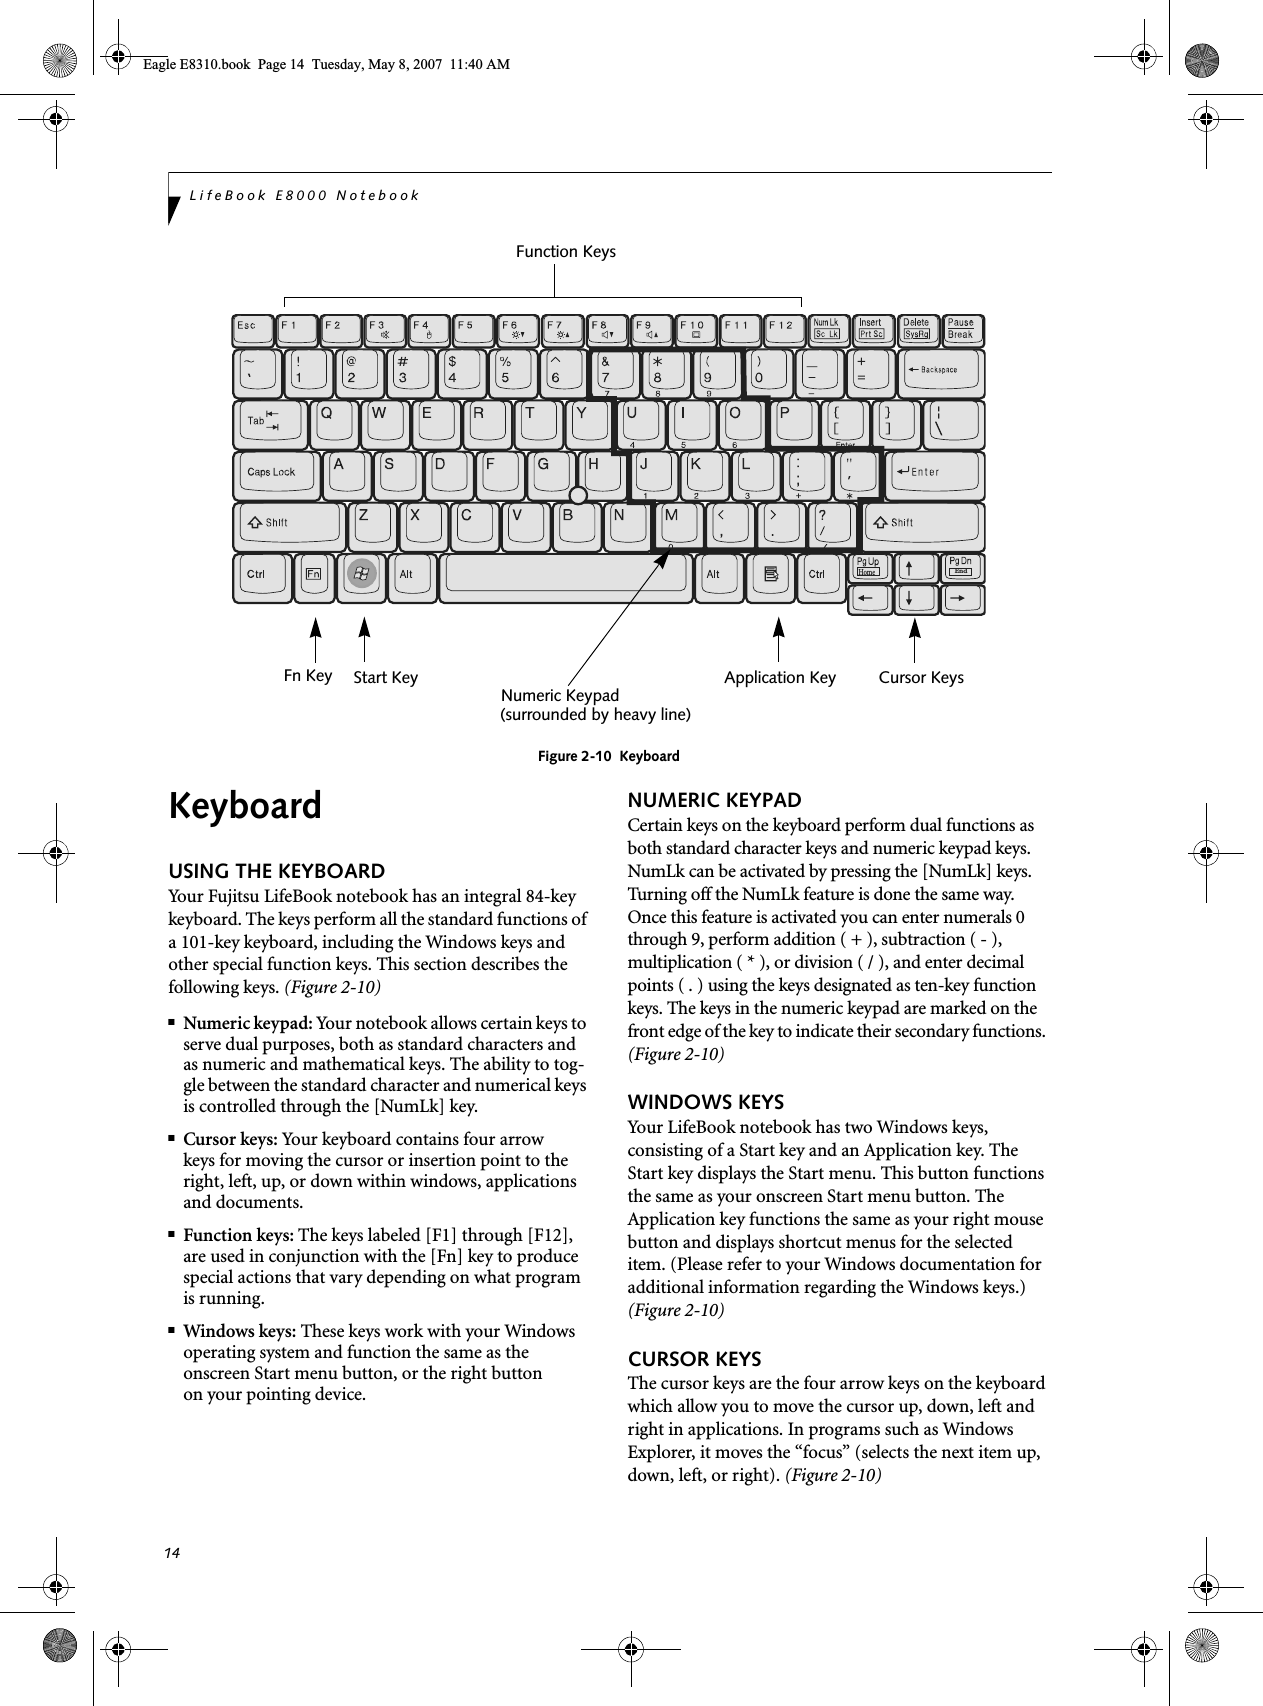 14LifeBook E8000 NotebookFigure 2-10  KeyboardKeyboardUSING THE KEYBOARDYour Fujitsu LifeBook notebook has an integral 84-key keyboard. The keys perform all the standard functions of a 101-key keyboard, including the Windows keys and other special function keys. This section describes the following keys. (Figure 2-10)■Numeric keypad: Your notebook allows certain keys to serve dual purposes, both as standard characters and as numeric and mathematical keys. The ability to tog-gle between the standard character and numerical keys is controlled through the [NumLk] key.■Cursor keys: Your keyboard contains four arrowkeys for moving the cursor or insertion point to the right, left, up, or down within windows, applications and documents. ■Function keys: The keys labeled [F1] through [F12], are used in conjunction with the [Fn] key to produce special actions that vary depending on what program is running. ■Windows keys: These keys work with your Windows operating system and function the same as the onscreen Start menu button, or the right buttonon your pointing device.NUMERIC KEYPADCertain keys on the keyboard perform dual functions as both standard character keys and numeric keypad keys. NumLk can be activated by pressing the [NumLk] keys. Turning off the NumLk feature is done the same way. Once this feature is activated you can enter numerals 0 through 9, perform addition ( + ), subtraction ( - ),multiplication ( * ), or division ( / ), and enter decimal points ( . ) using the keys designated as ten-key function keys. The keys in the numeric keypad are marked on the front edge of the key to indicate their secondary functions. (Figure 2-10) WINDOWS KEYSYour LifeBook notebook has two Windows keys, consisting of a Start key and an Application key. The Start key displays the Start menu. This button functions the same as your onscreen Start menu button. The Application key functions the same as your right mouse button and displays shortcut menus for the selected item. (Please refer to your Windows documentation for additional information regarding the Windows keys.) (Figure 2-10)CURSOR KEYSThe cursor keys are the four arrow keys on the keyboard which allow you to move the cursor up, down, left and right in applications. In programs such as Windows Explorer, it moves the “focus” (selects the next item up, down, left, or right). (Figure 2-10)EndHomeFn Key Start KeyFunction KeysNumeric KeypadApplication Key Cursor Keys(surrounded by heavy line)Eagle E8310.book  Page 14  Tuesday, May 8, 2007  11:40 AM